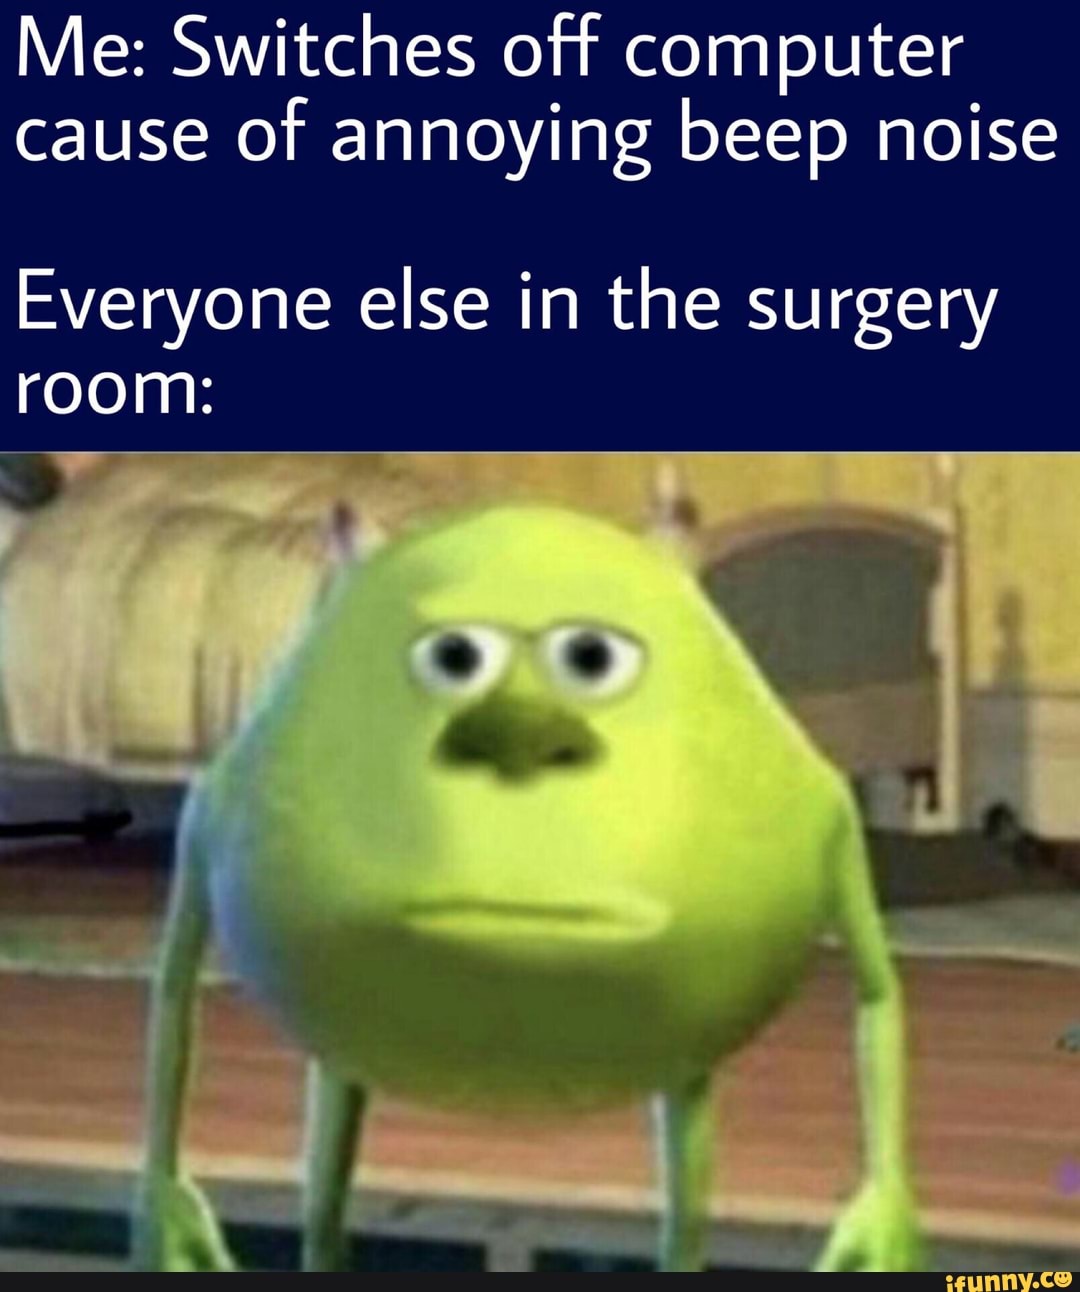 beep noise for swearing